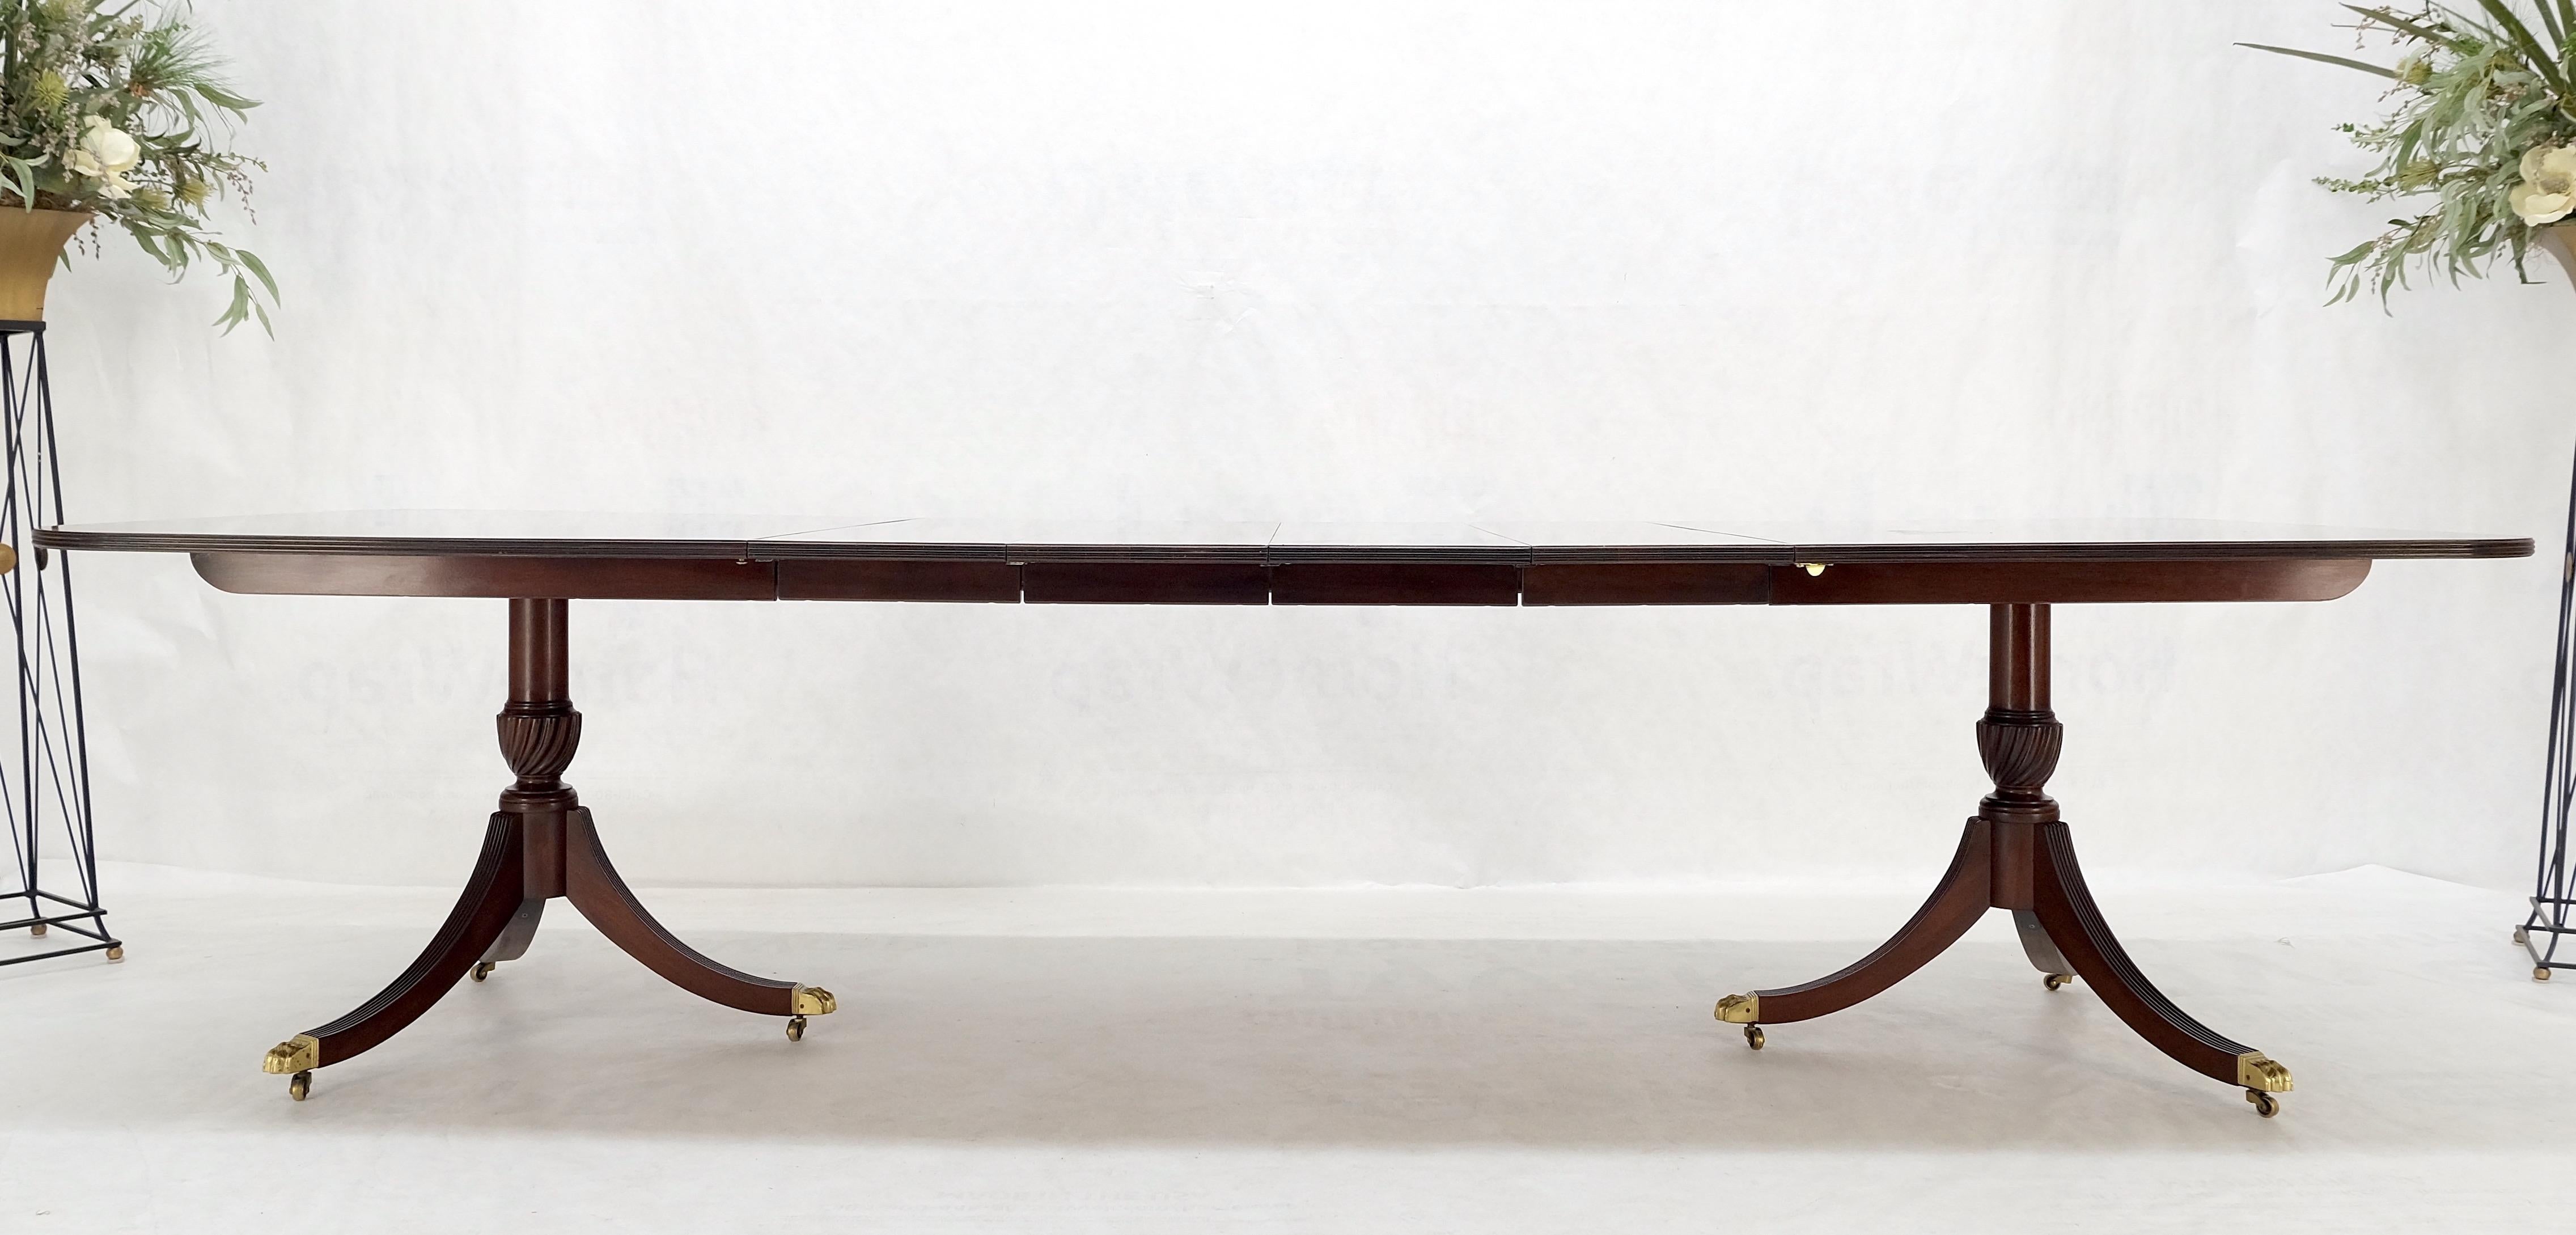 20th Century Double Pedestal 4 Leafs Banded Mahogany Dining Table by Kittinger Mint! For Sale